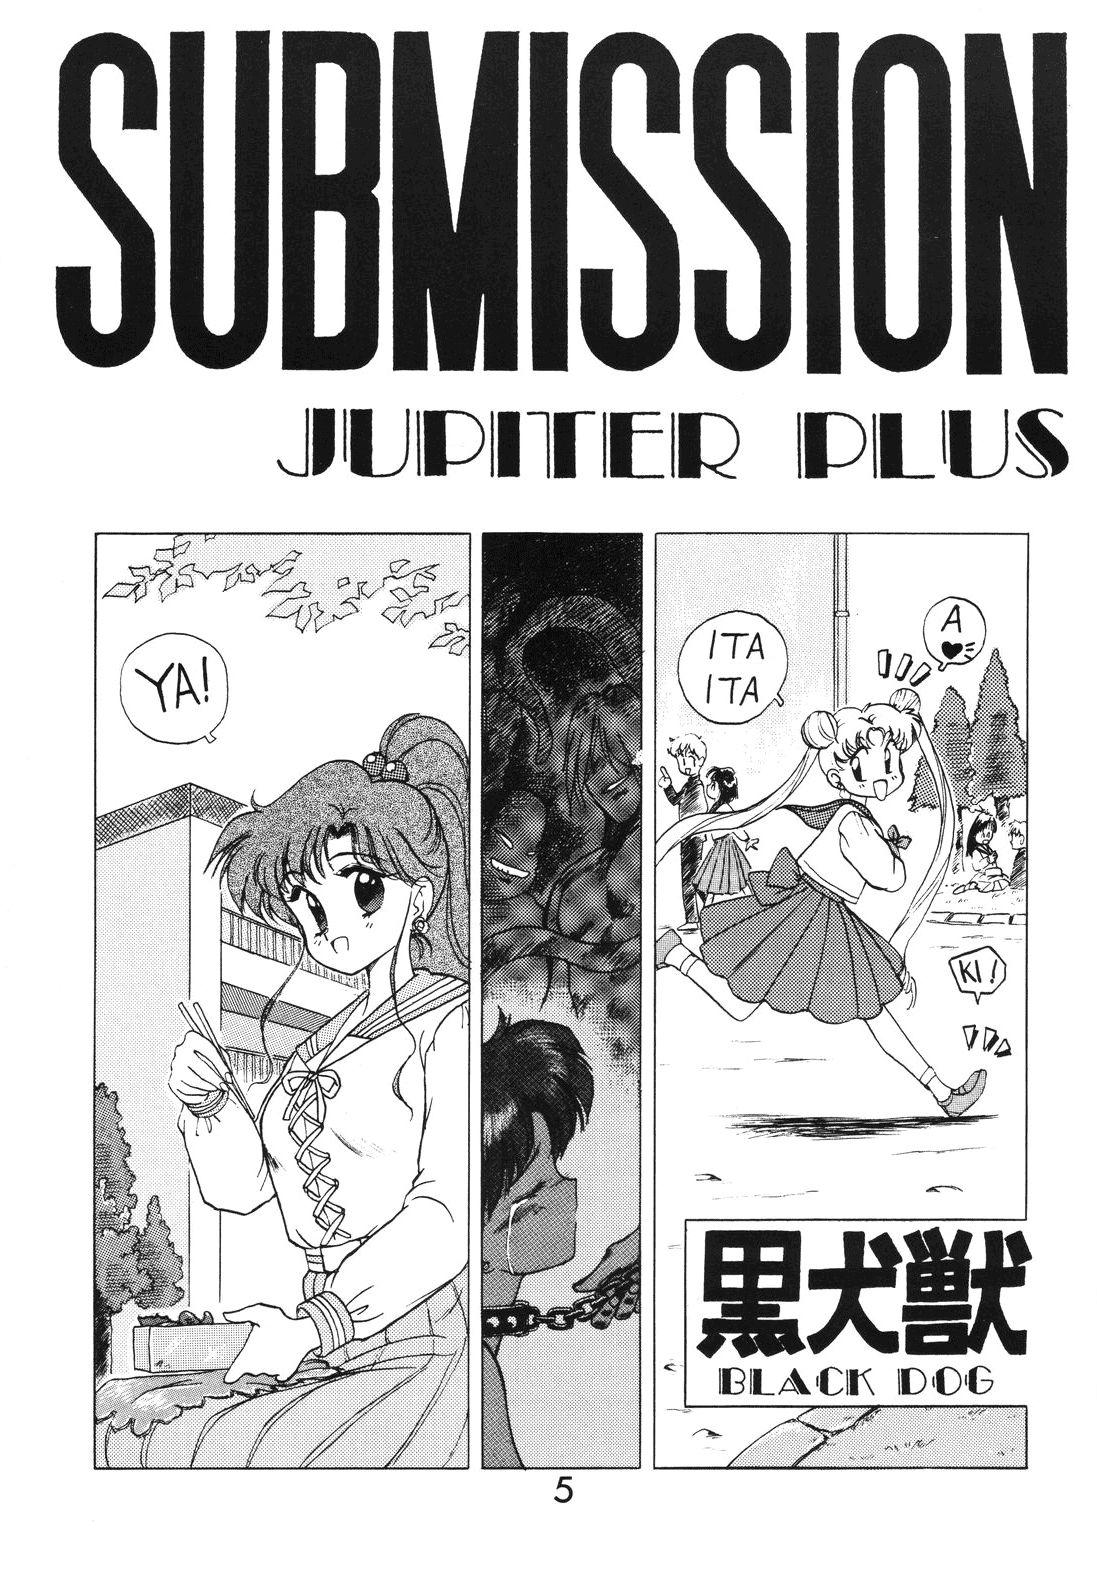 Hotwife SUBMISSION JUPITER PLUS - Sailor moon Real - Page 5